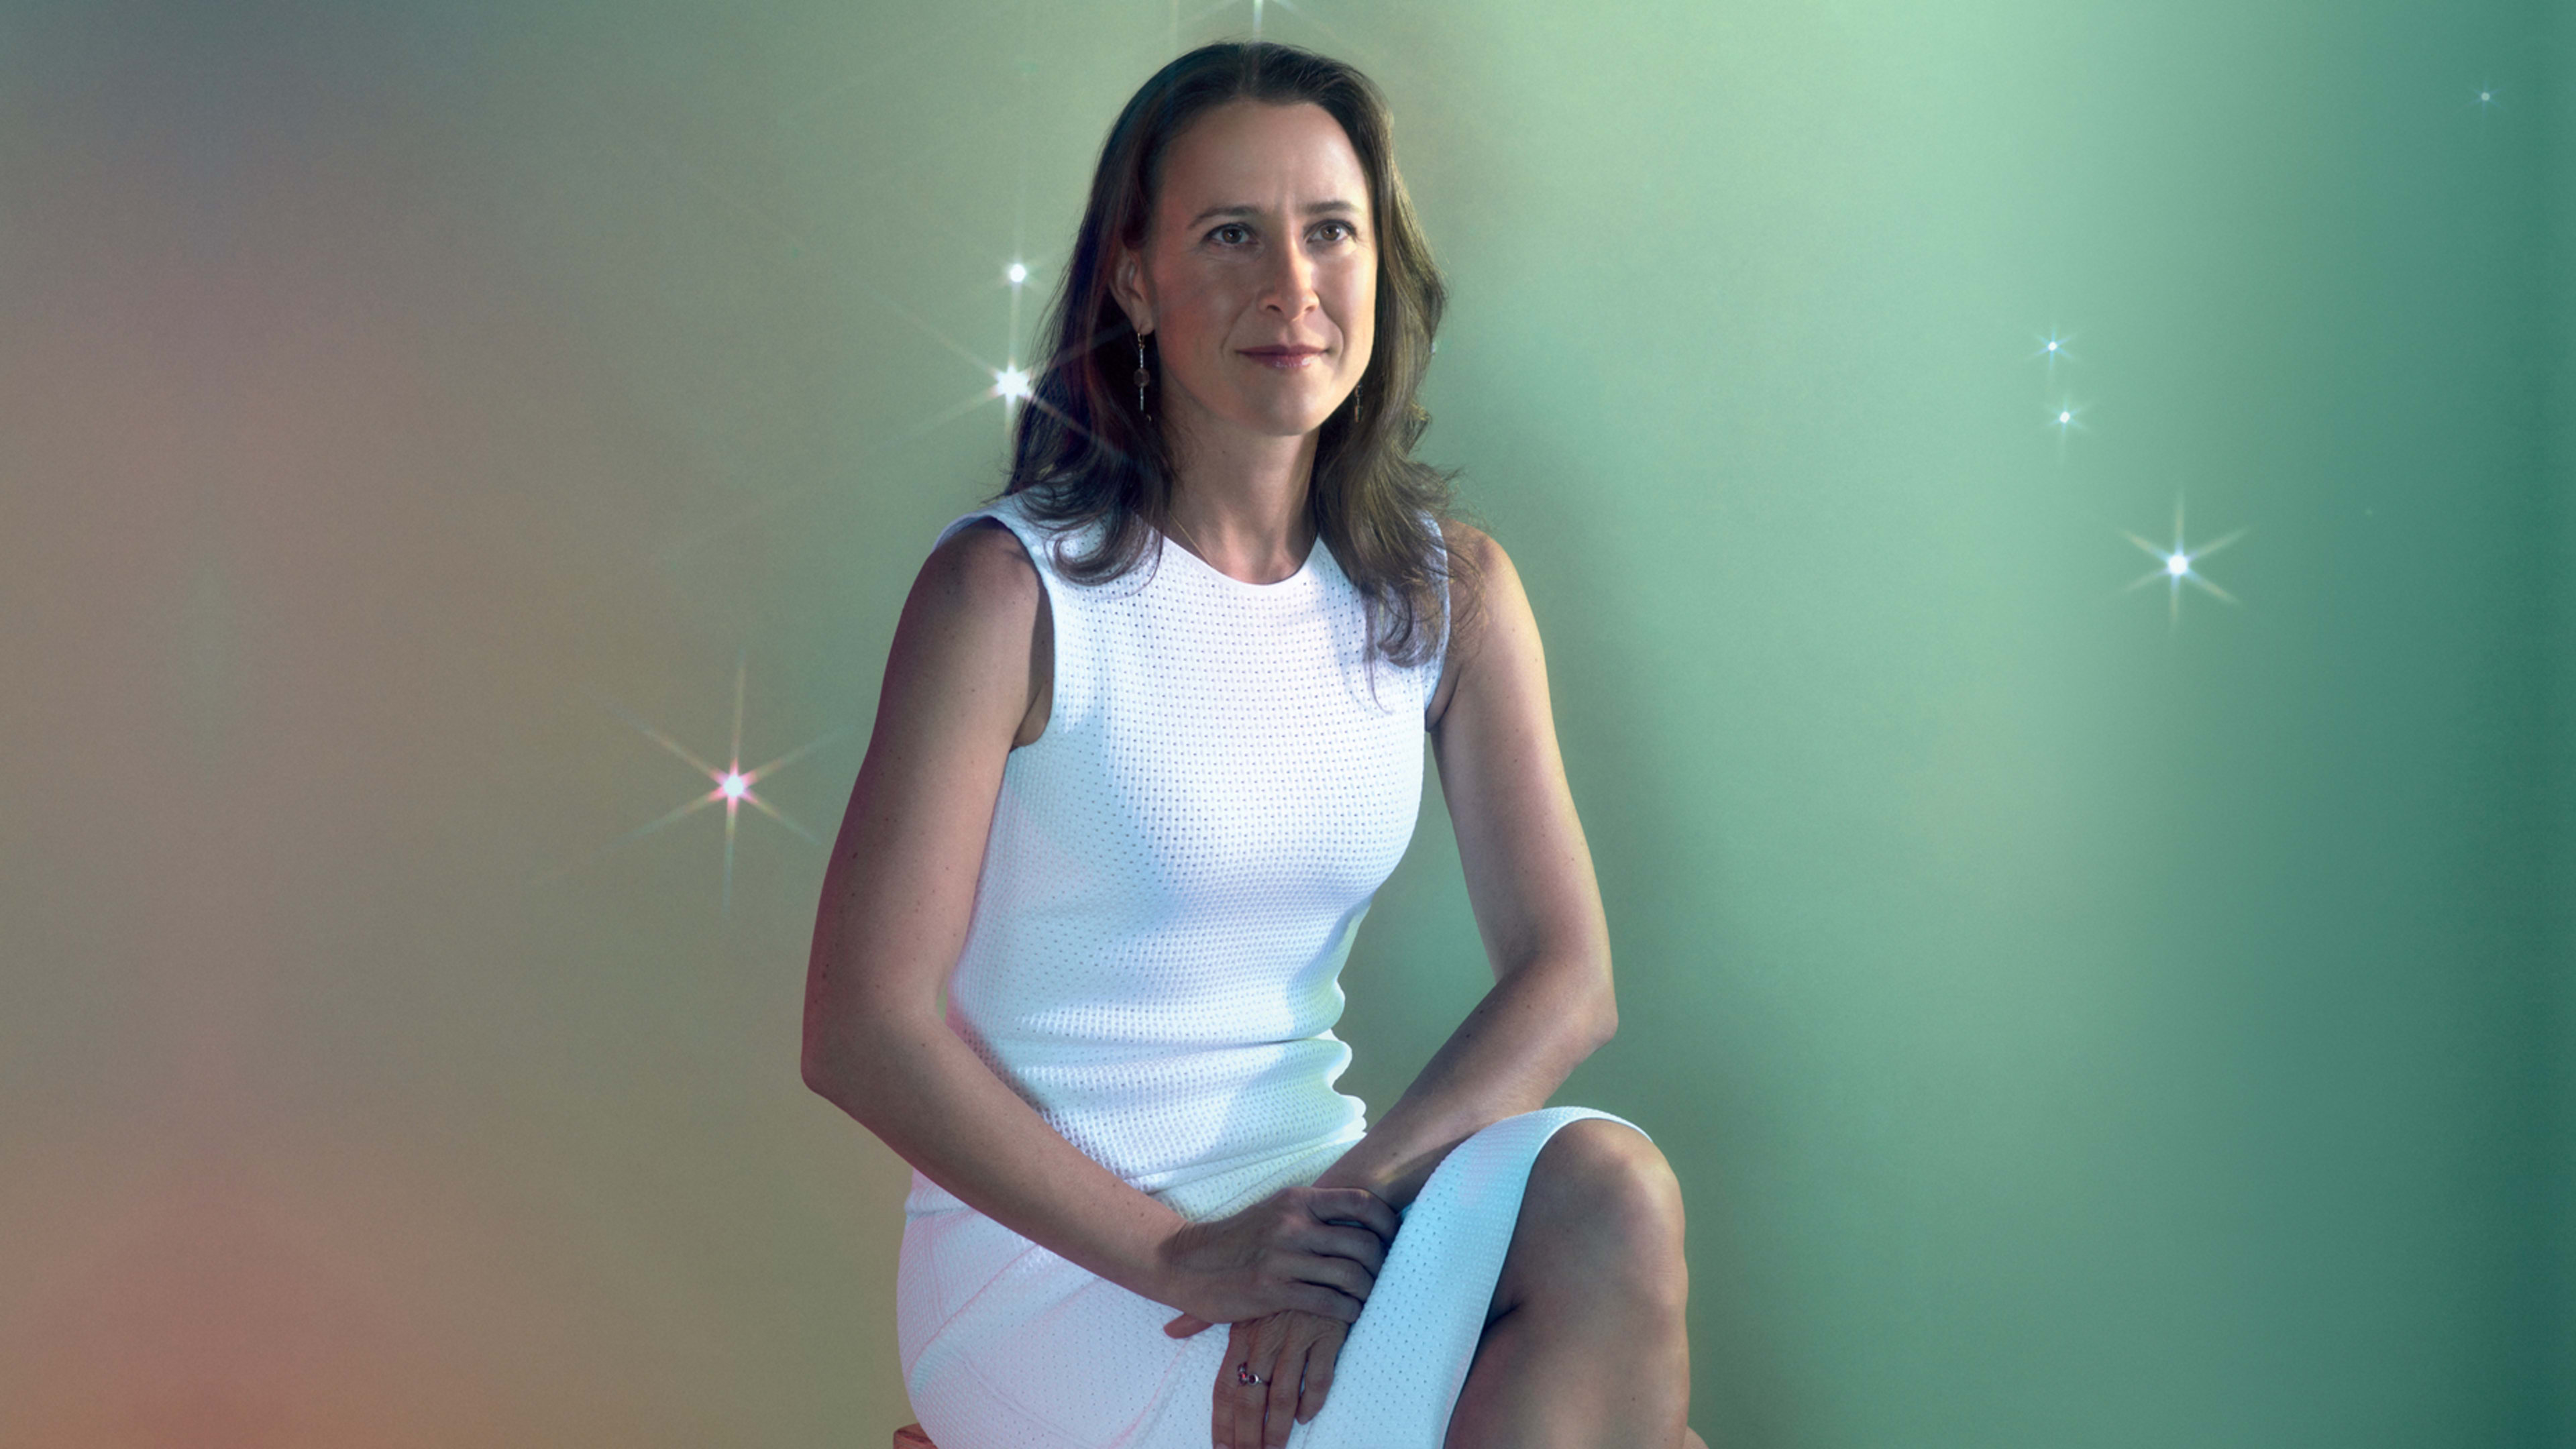 After A Comeback, 23andMe Faces Its Next Test